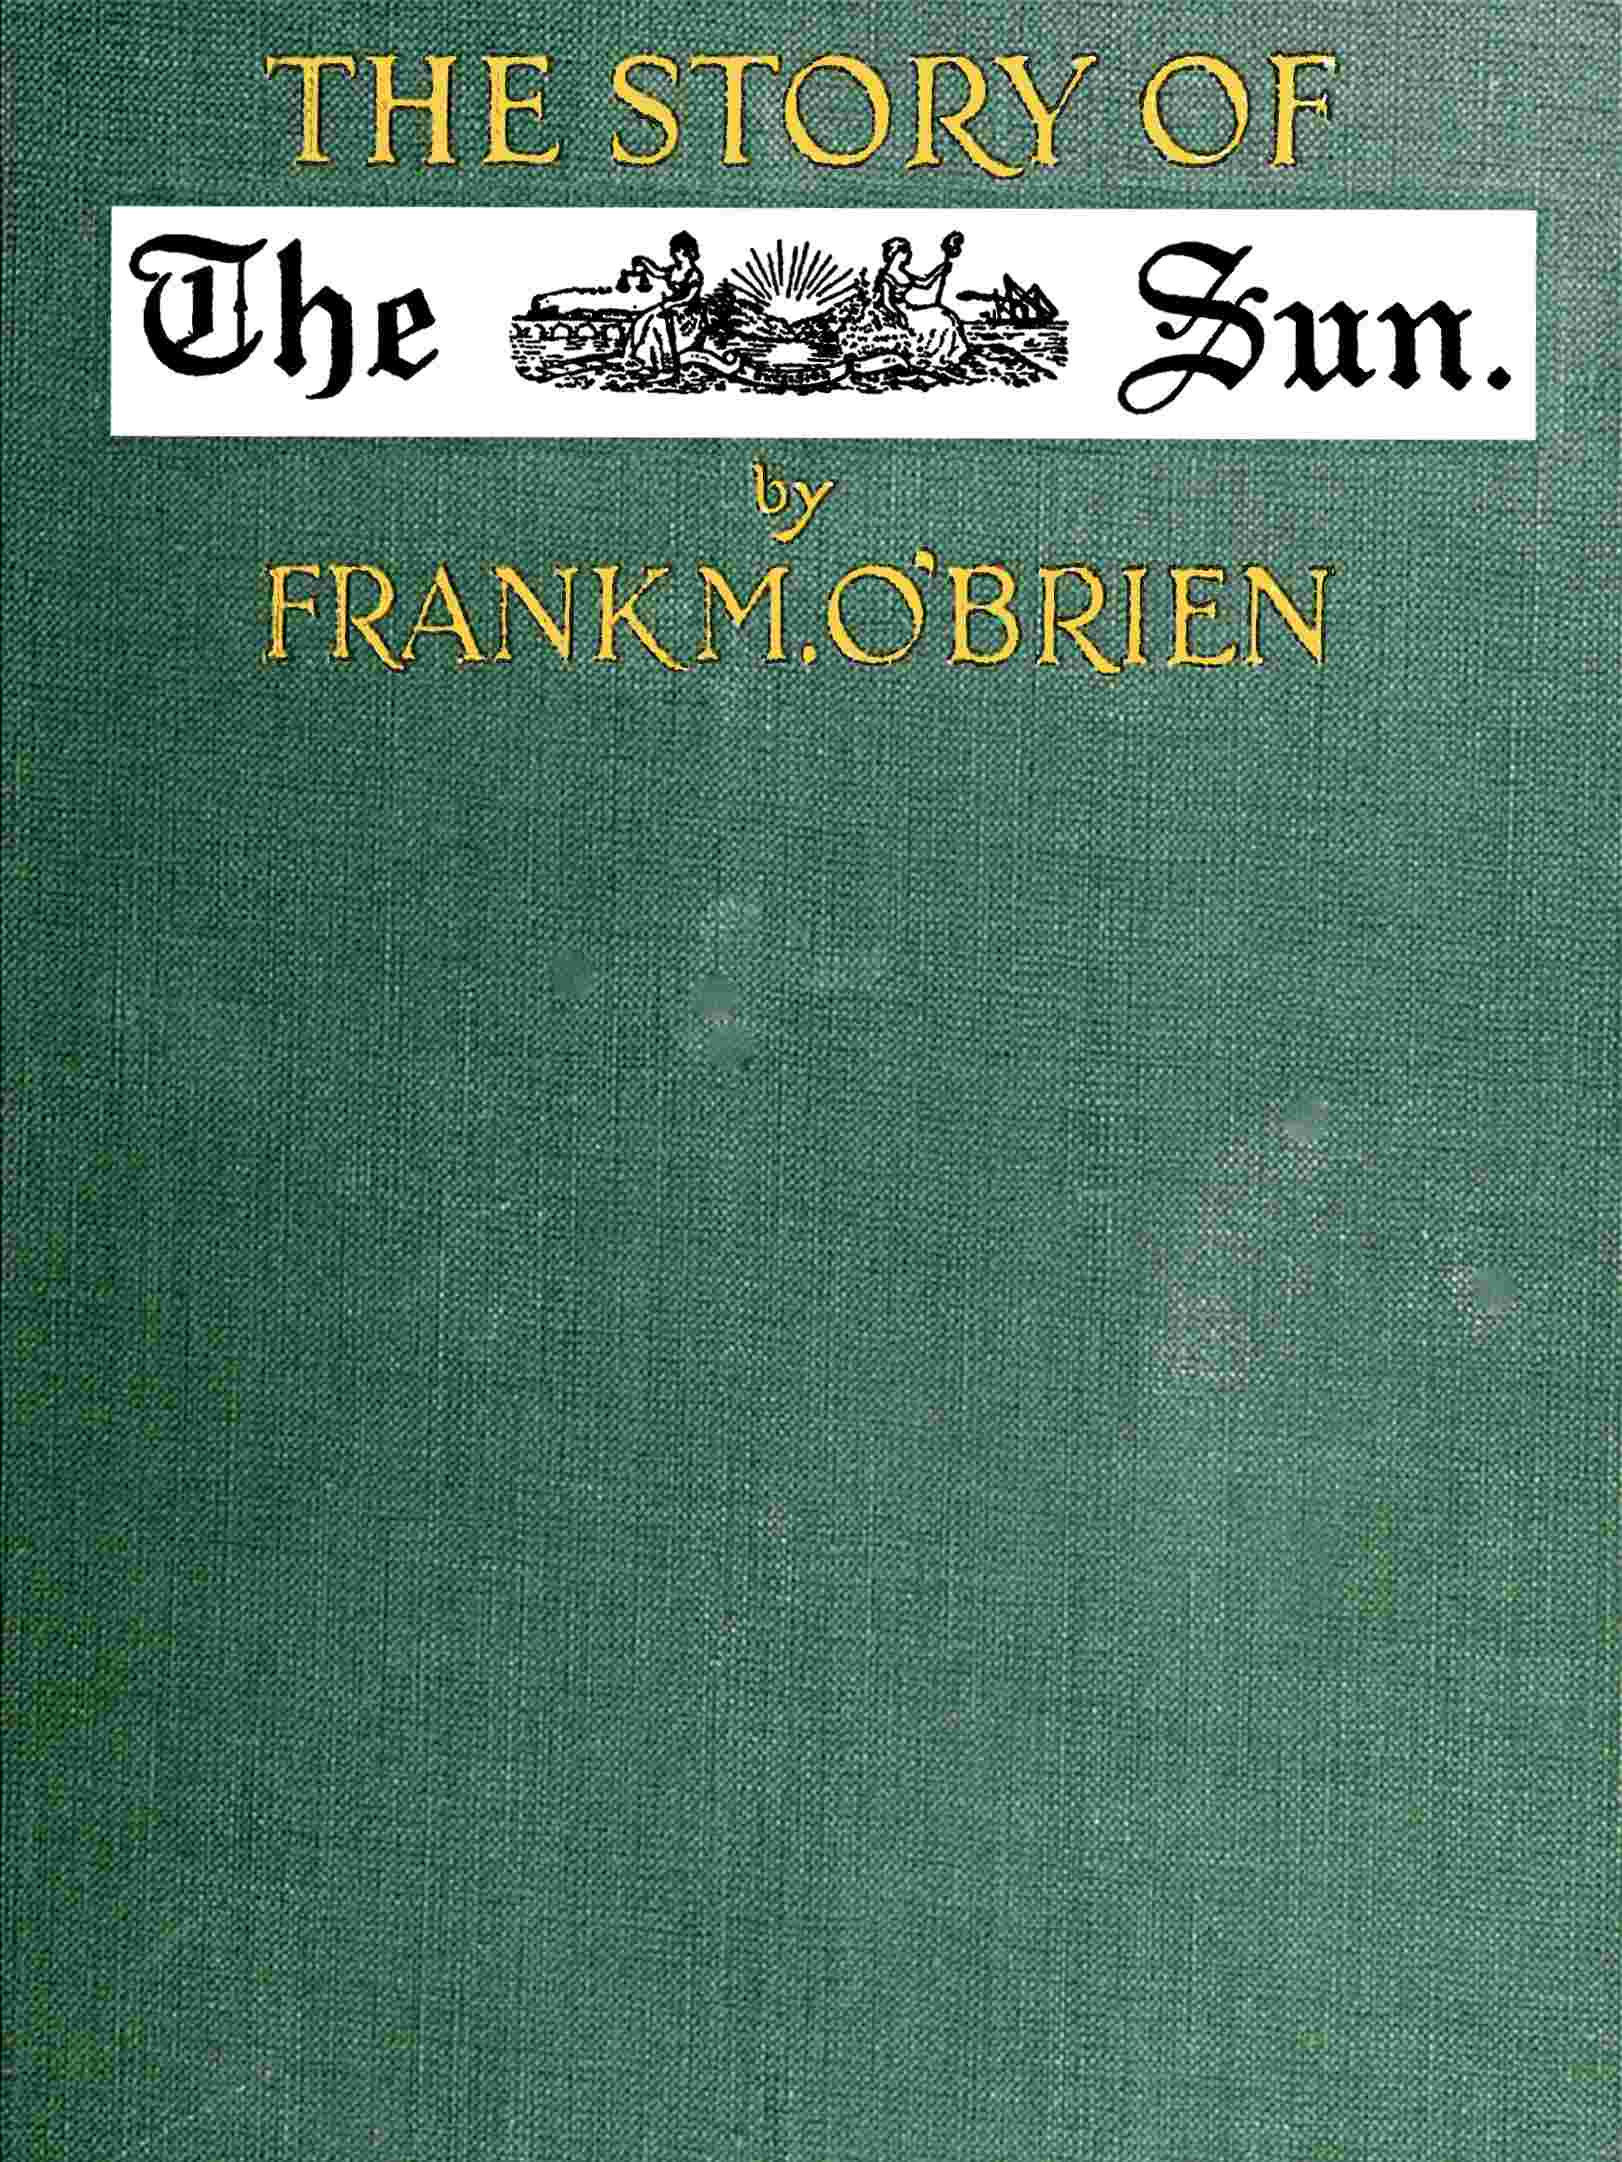 The Story of The Sun, by Frank M. O'Brien—A Project Gutenberg eBook